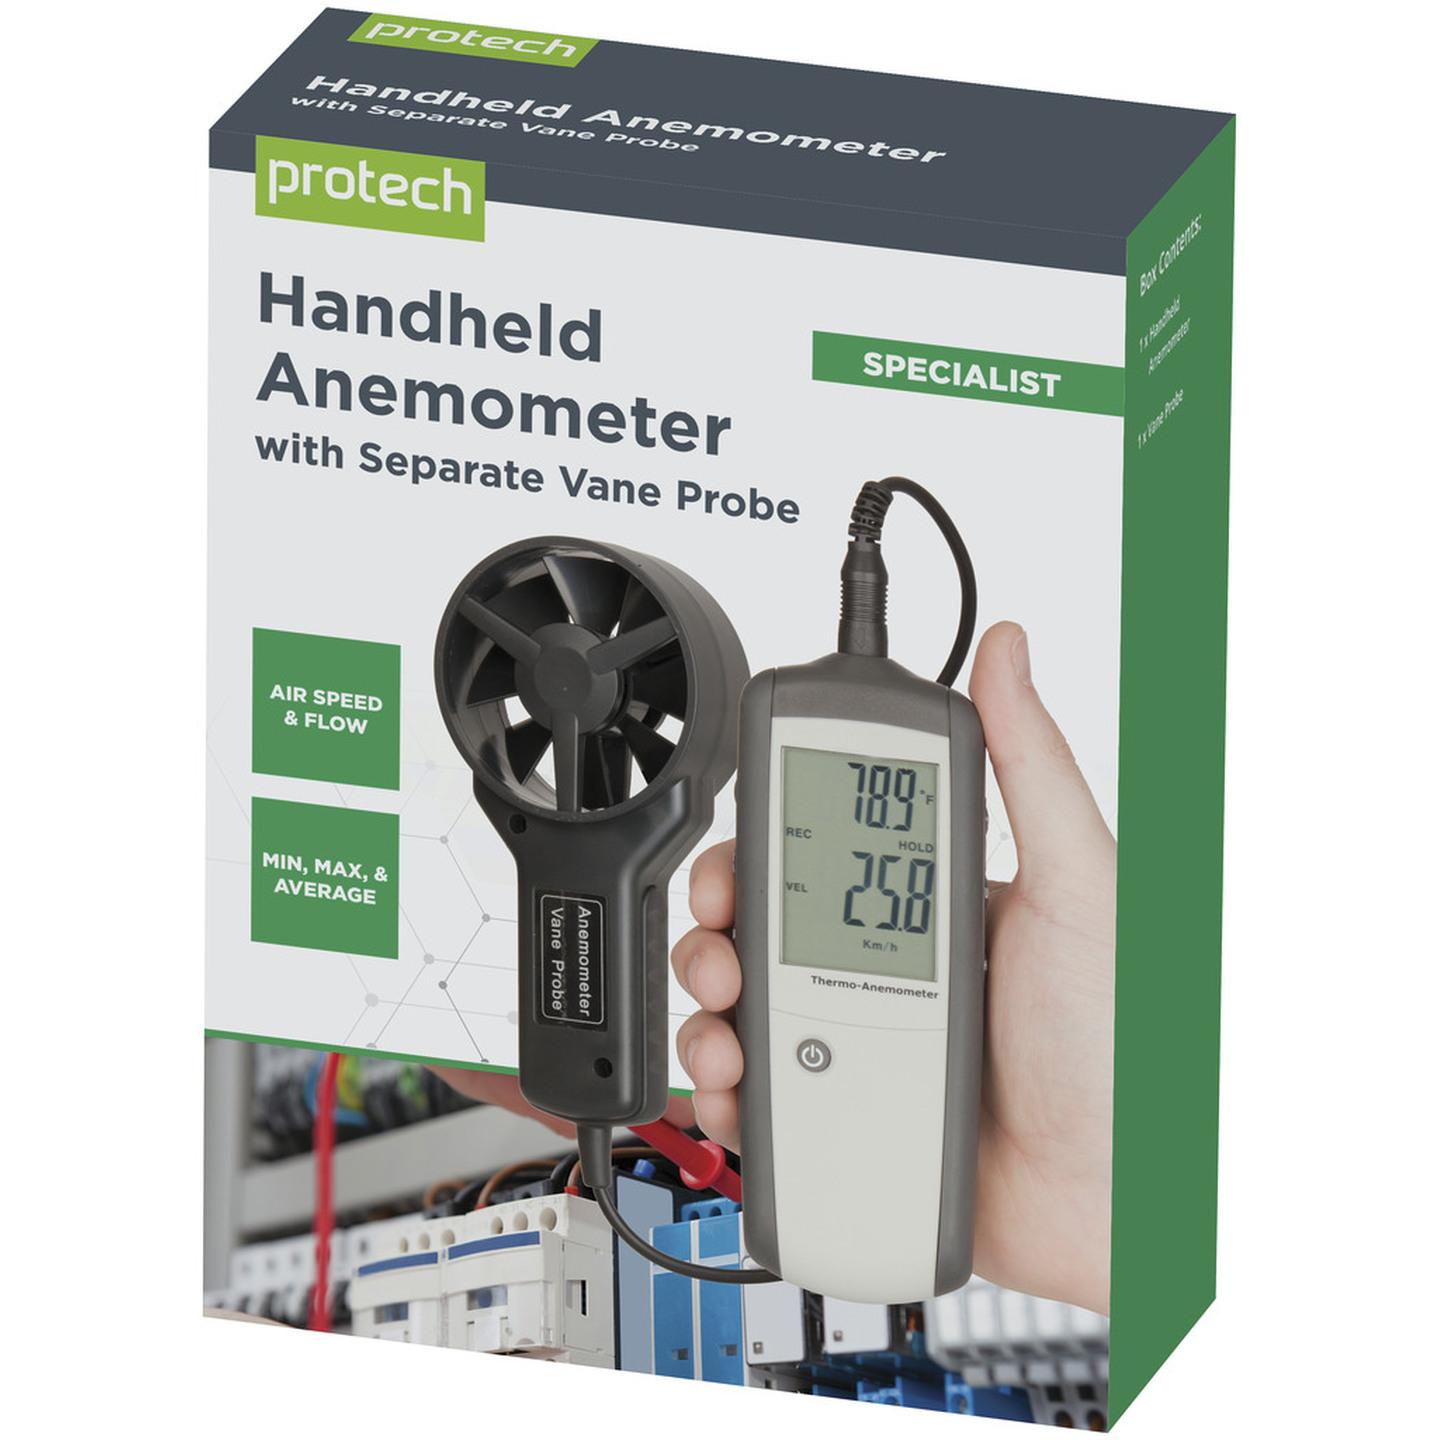 Hand-held Anemometer with Separate Sensor